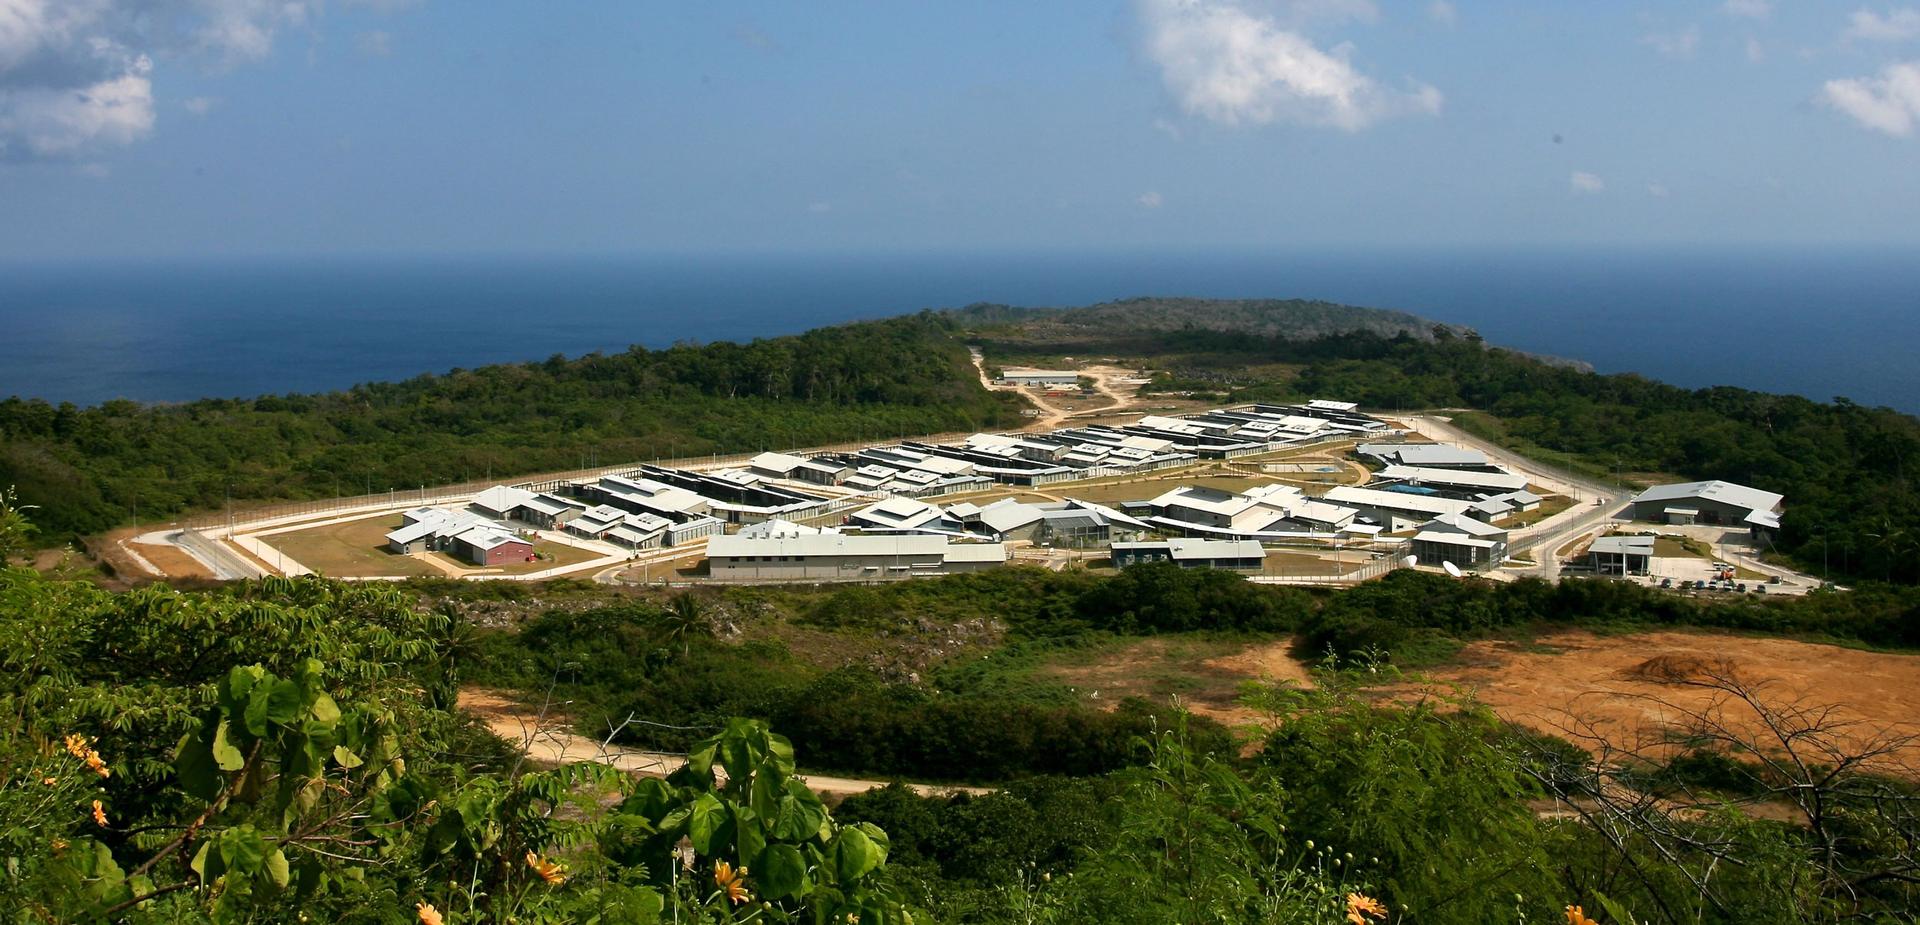 An aerial view of a detention center